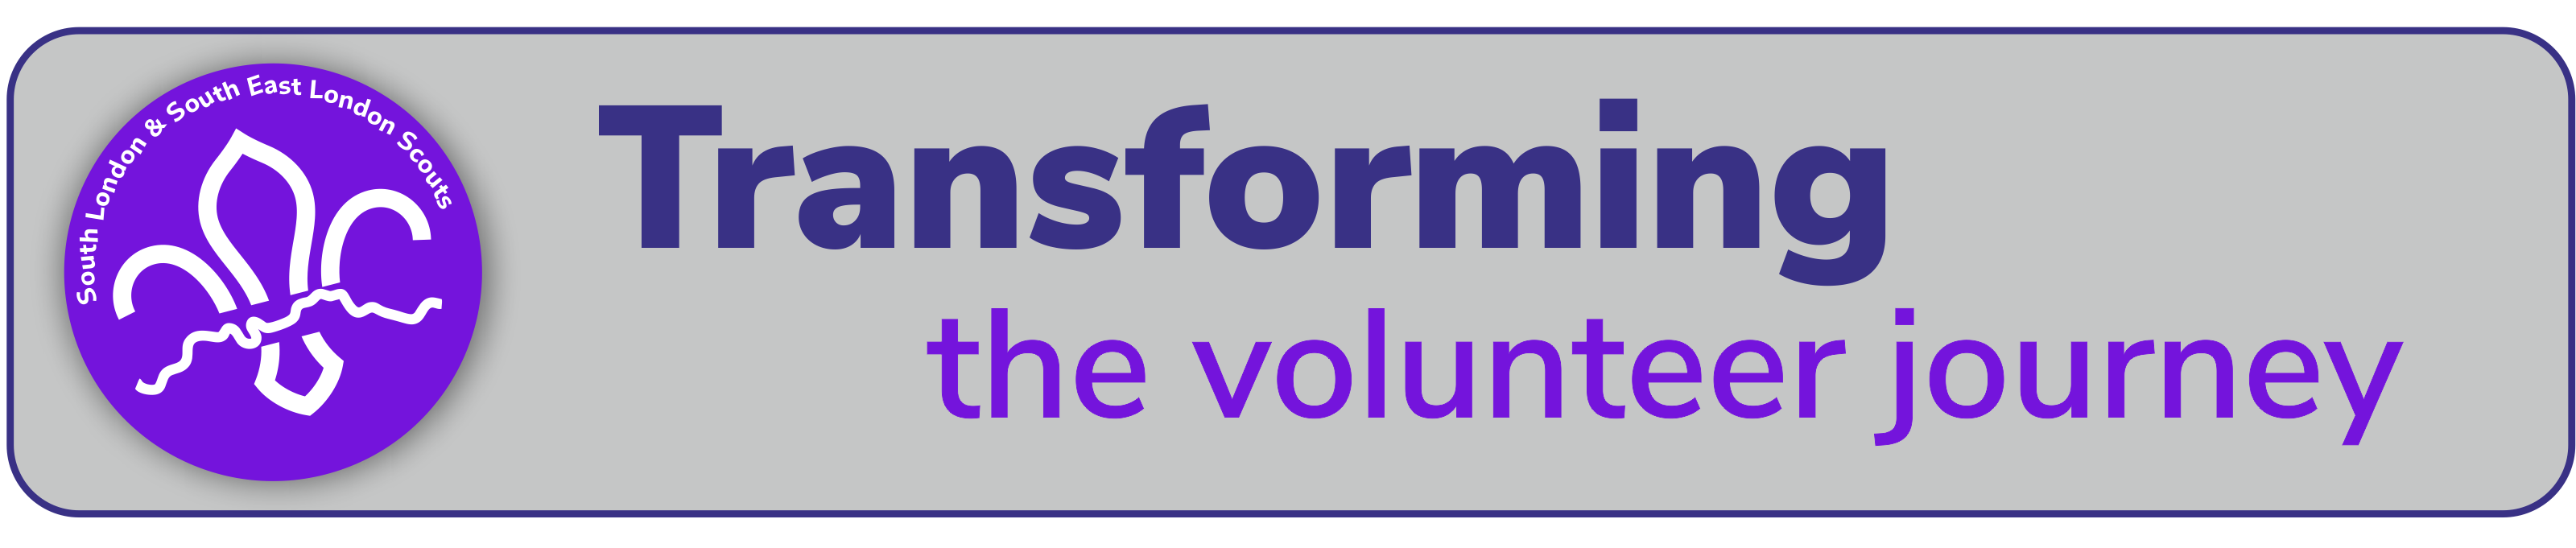 We are transforming the volunteer journey 